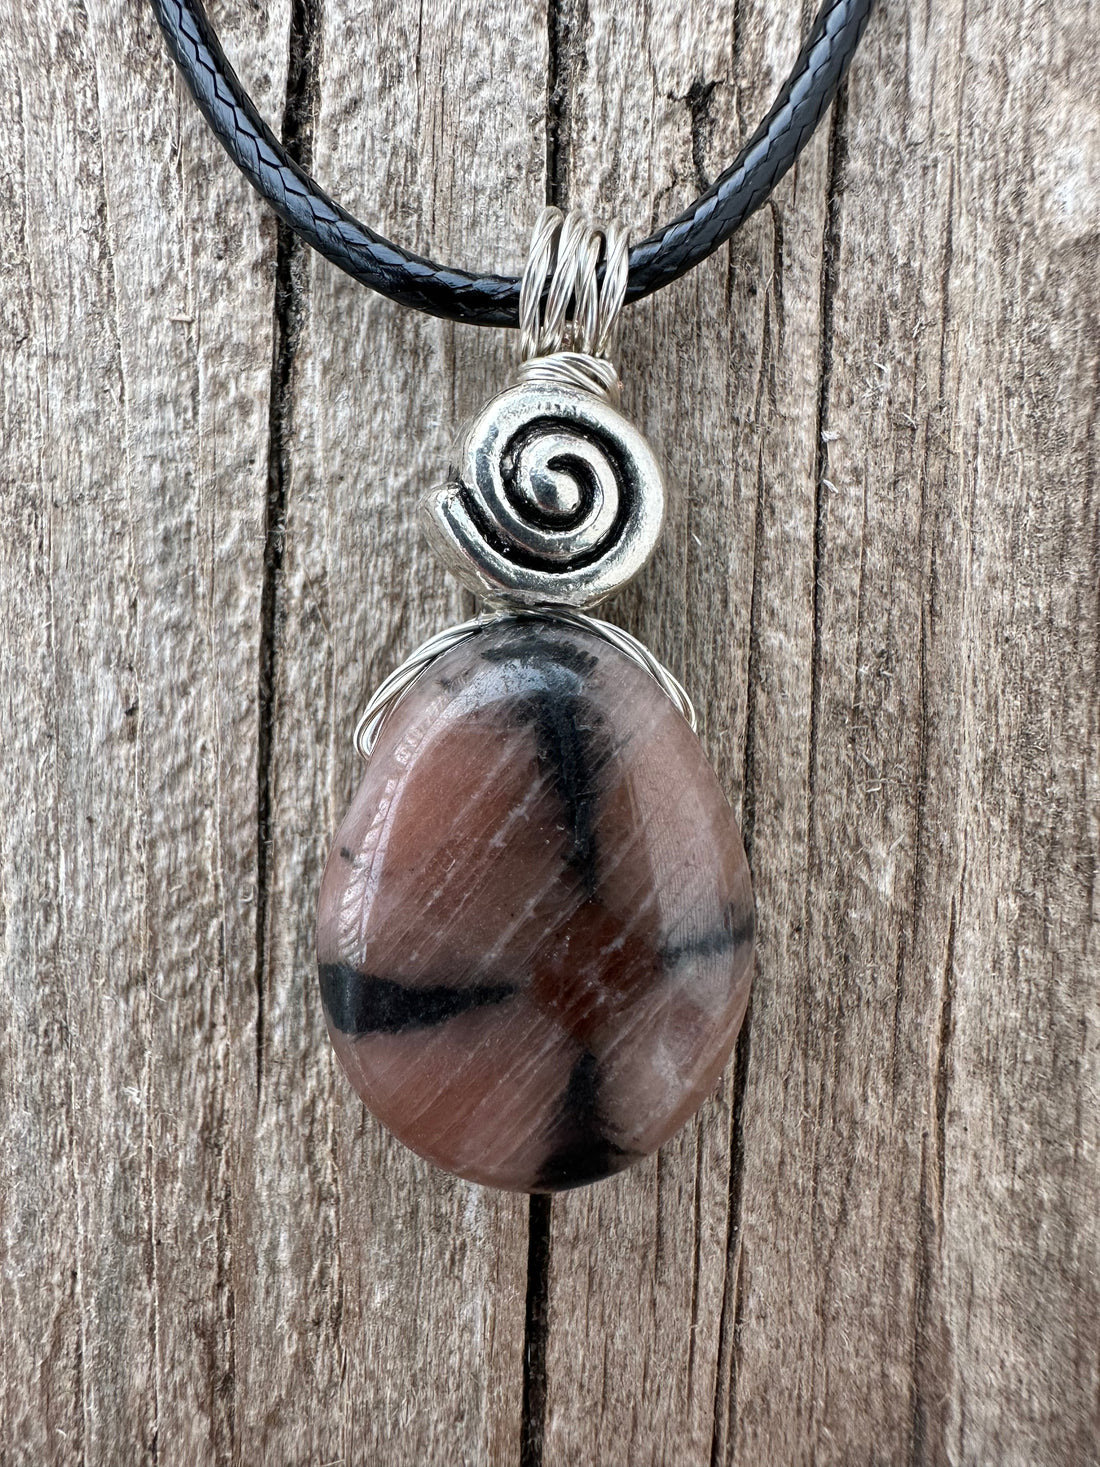 Chiastolite Pendant for Protection and Rebirth. Black cable and Swirl for Higher Consciousness.